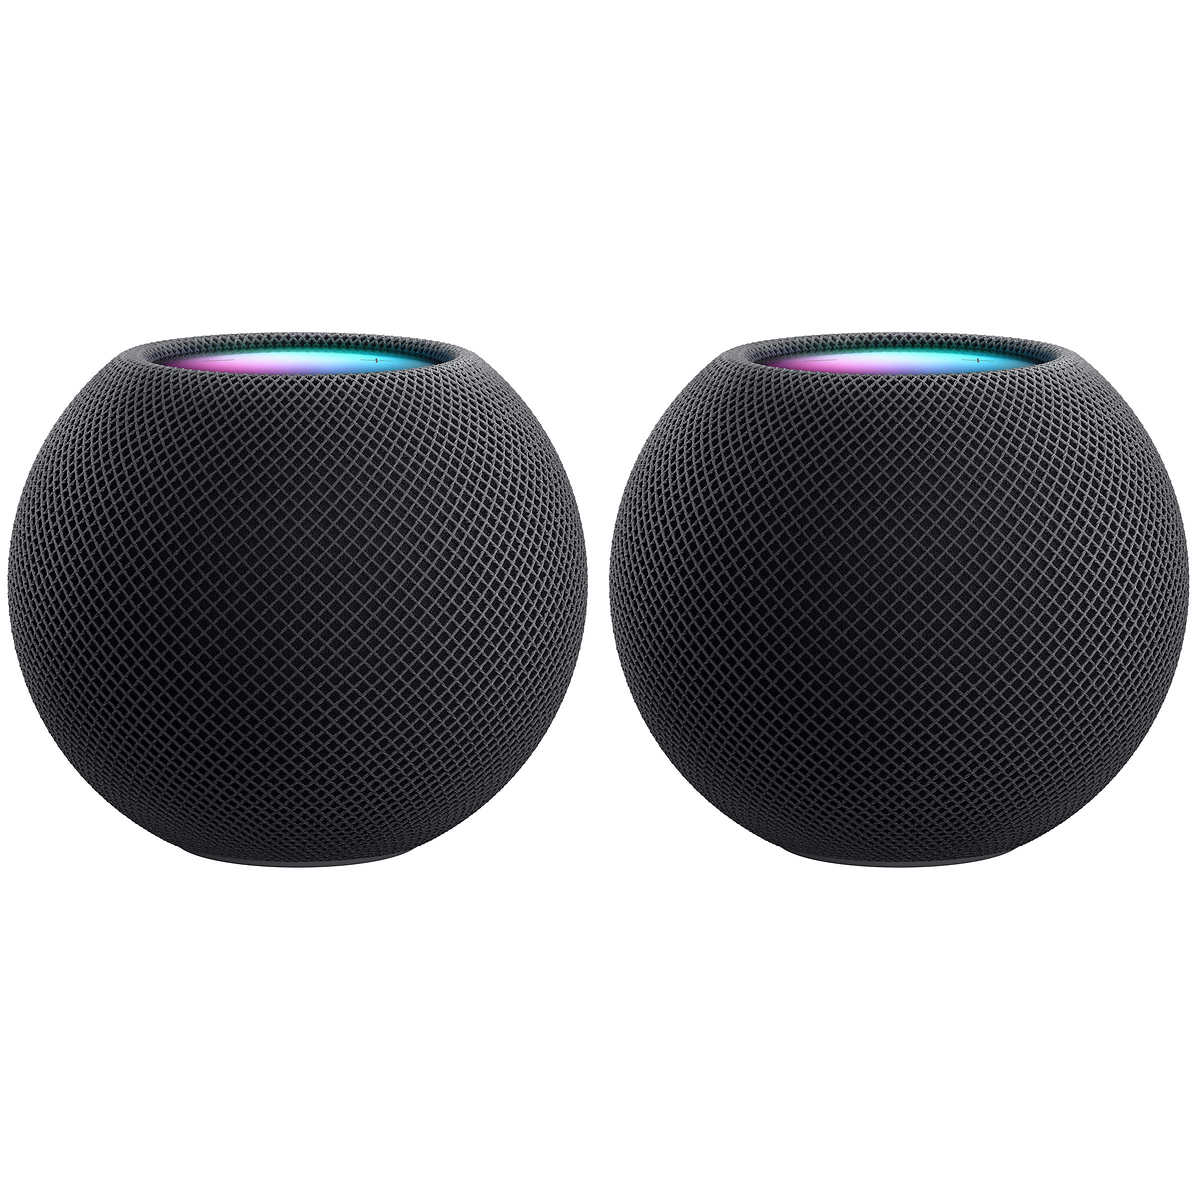 Apple HomePod Smart Speaker Space Grey and White FAST AND FREE DELIVERY 